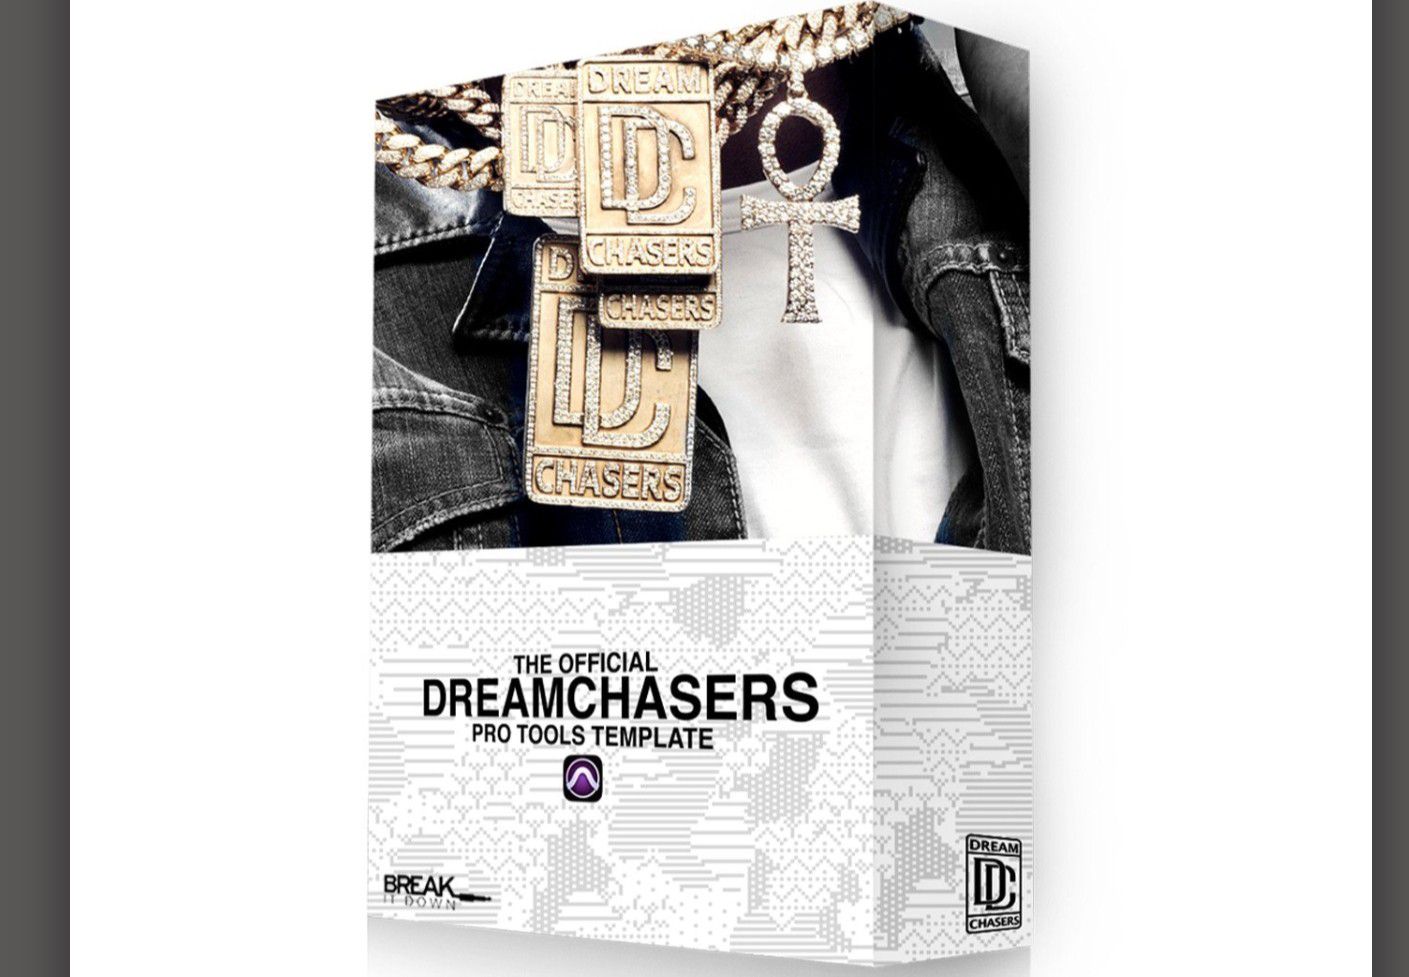 Official Dreamchasers Pro Tools Template